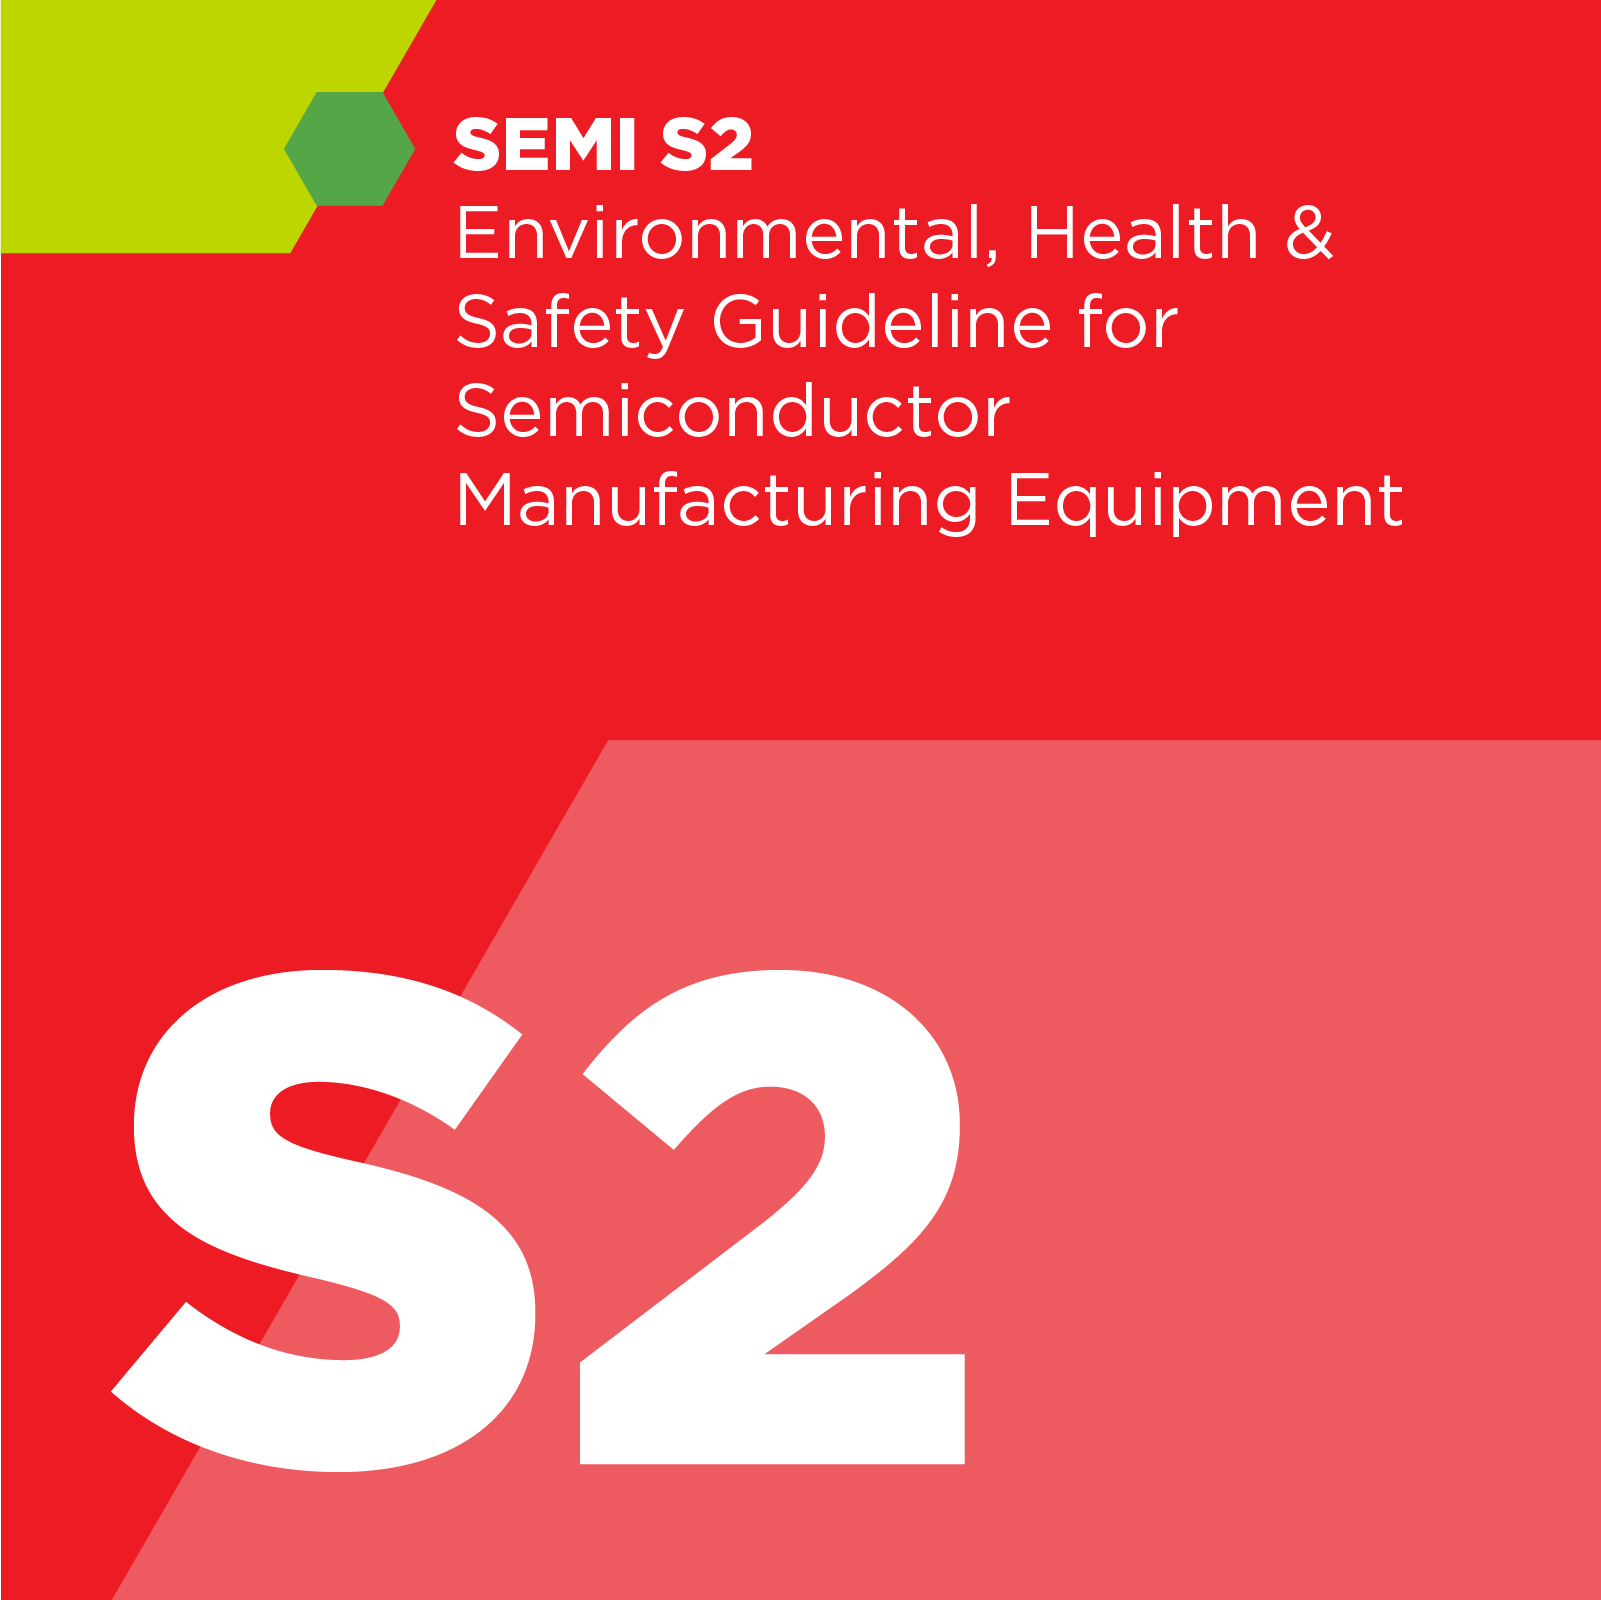 S00200 - SEMI S2 - Environmental, Health, and Safety Guideline for Semiconductor Manufacturing Equipment